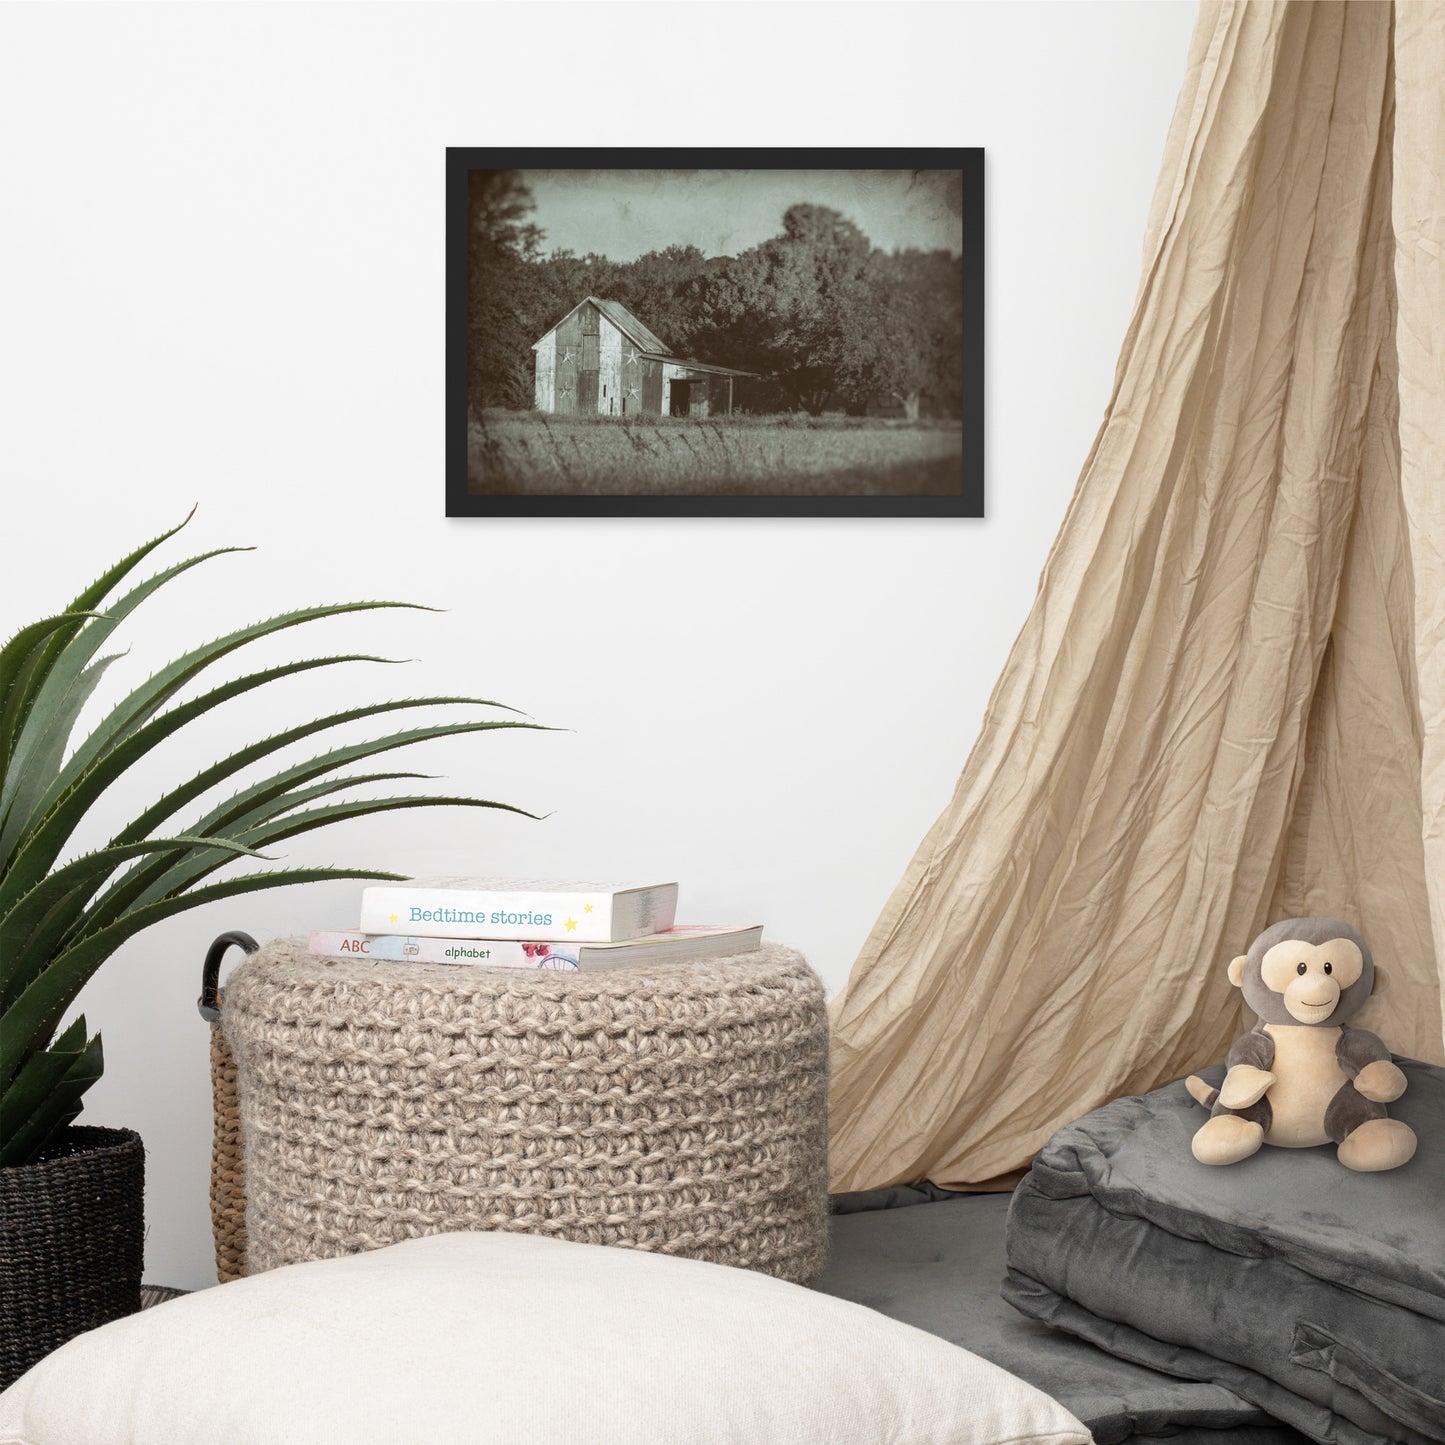 Patriotic Barn in Field Vintage Black and White Glass Plate Framed Photo Paper Wall Art Prints